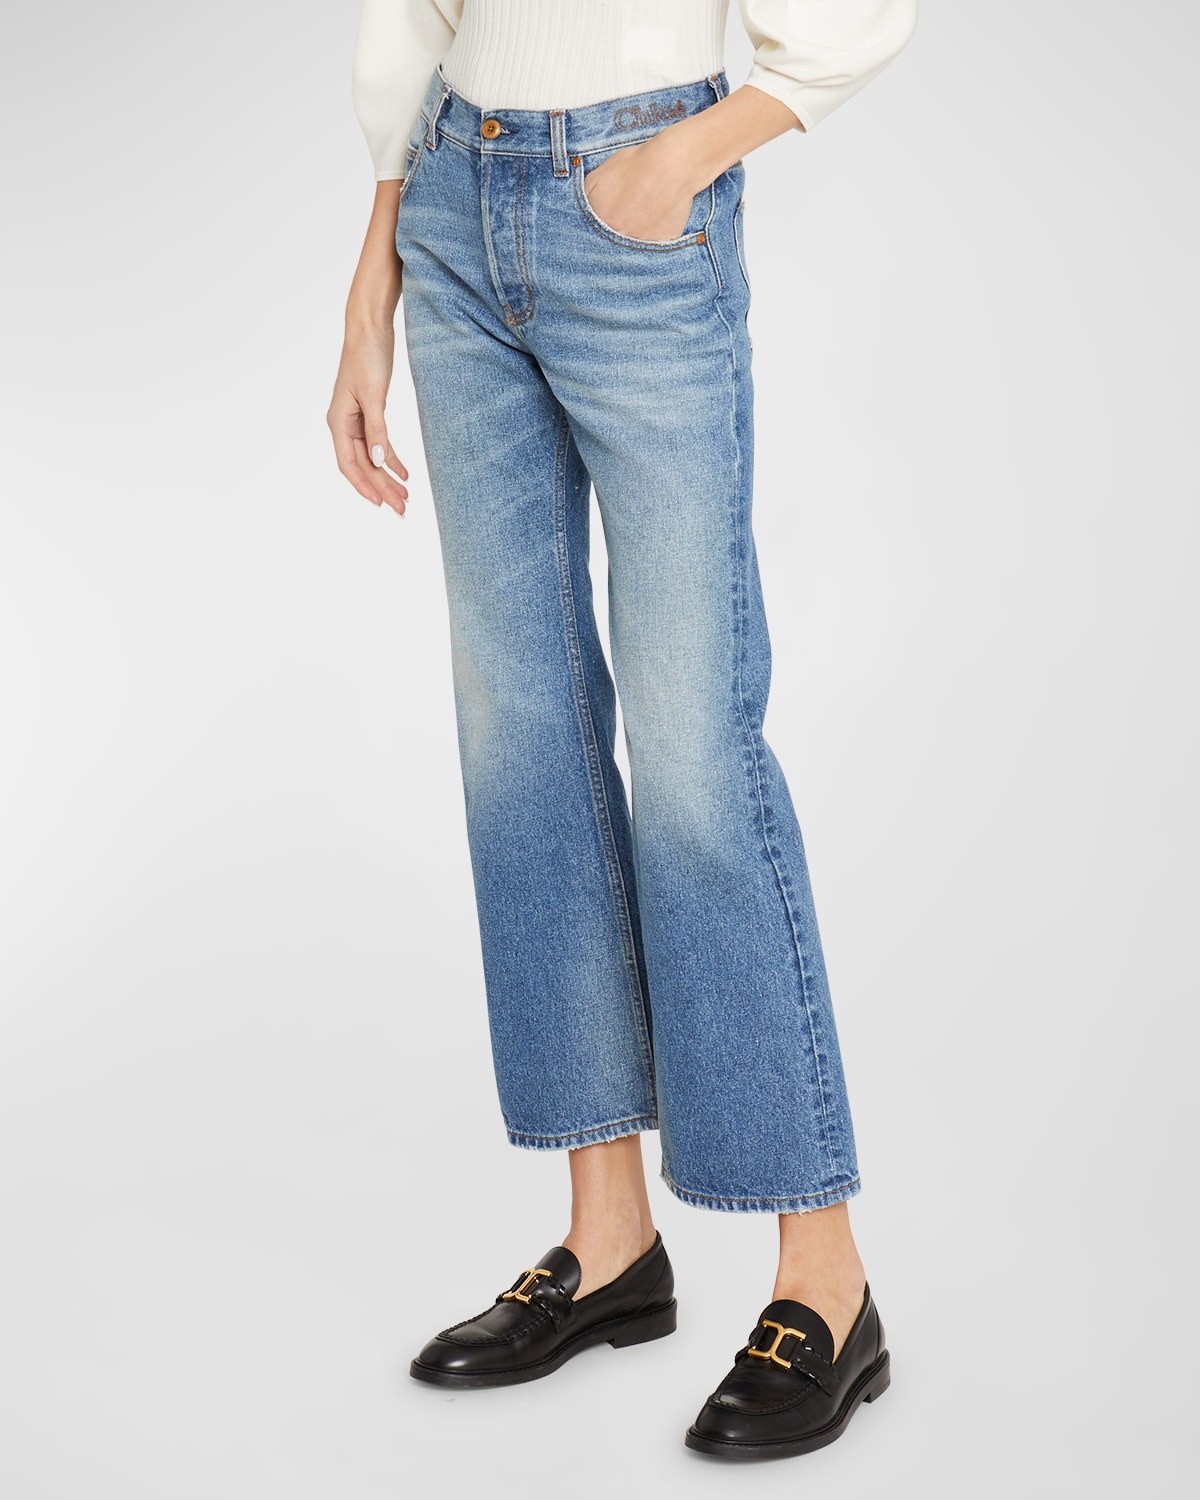 CHLOÉ CROPPED FLARE JEANS